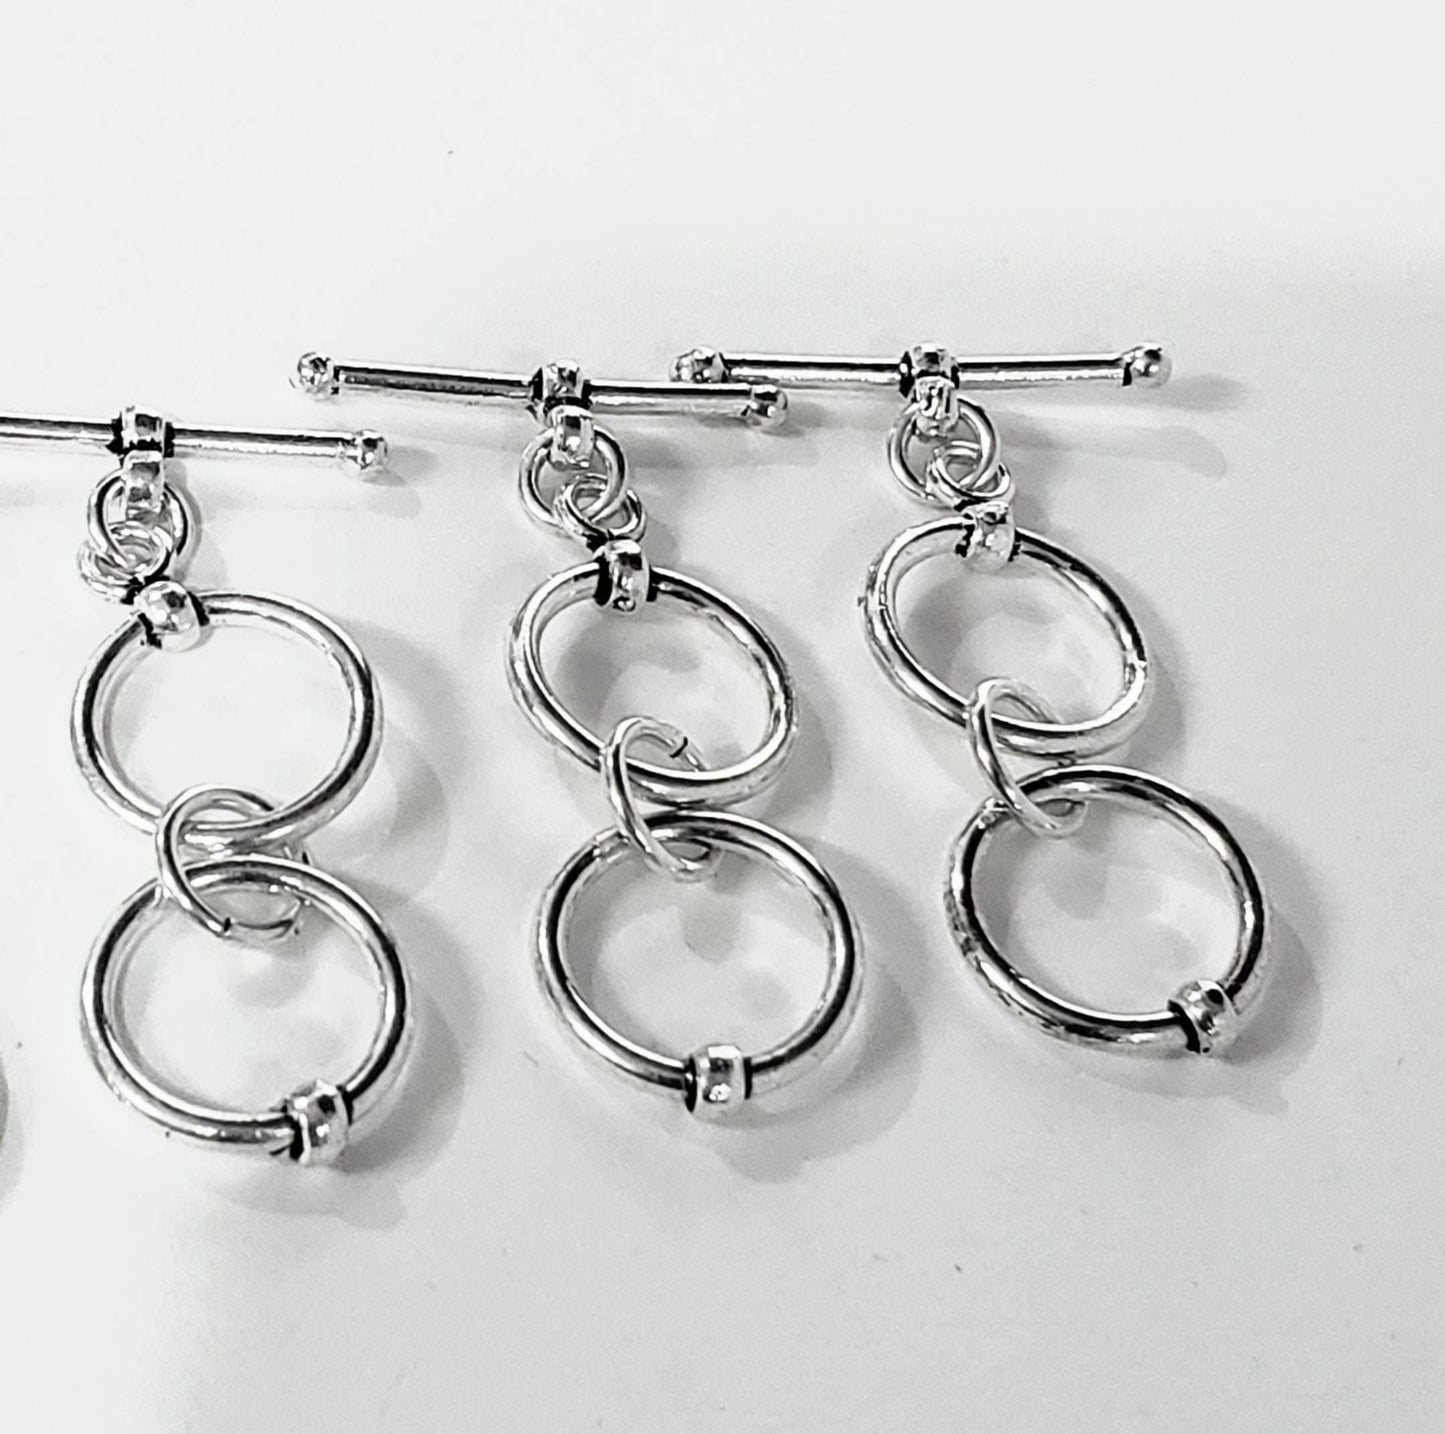 925 Sterling Silver Bali Toggle 14mm Clasp 2 Ring Adjustable Toggle. 1 set. Necklace, Bracelet, Jewelry Making Supply